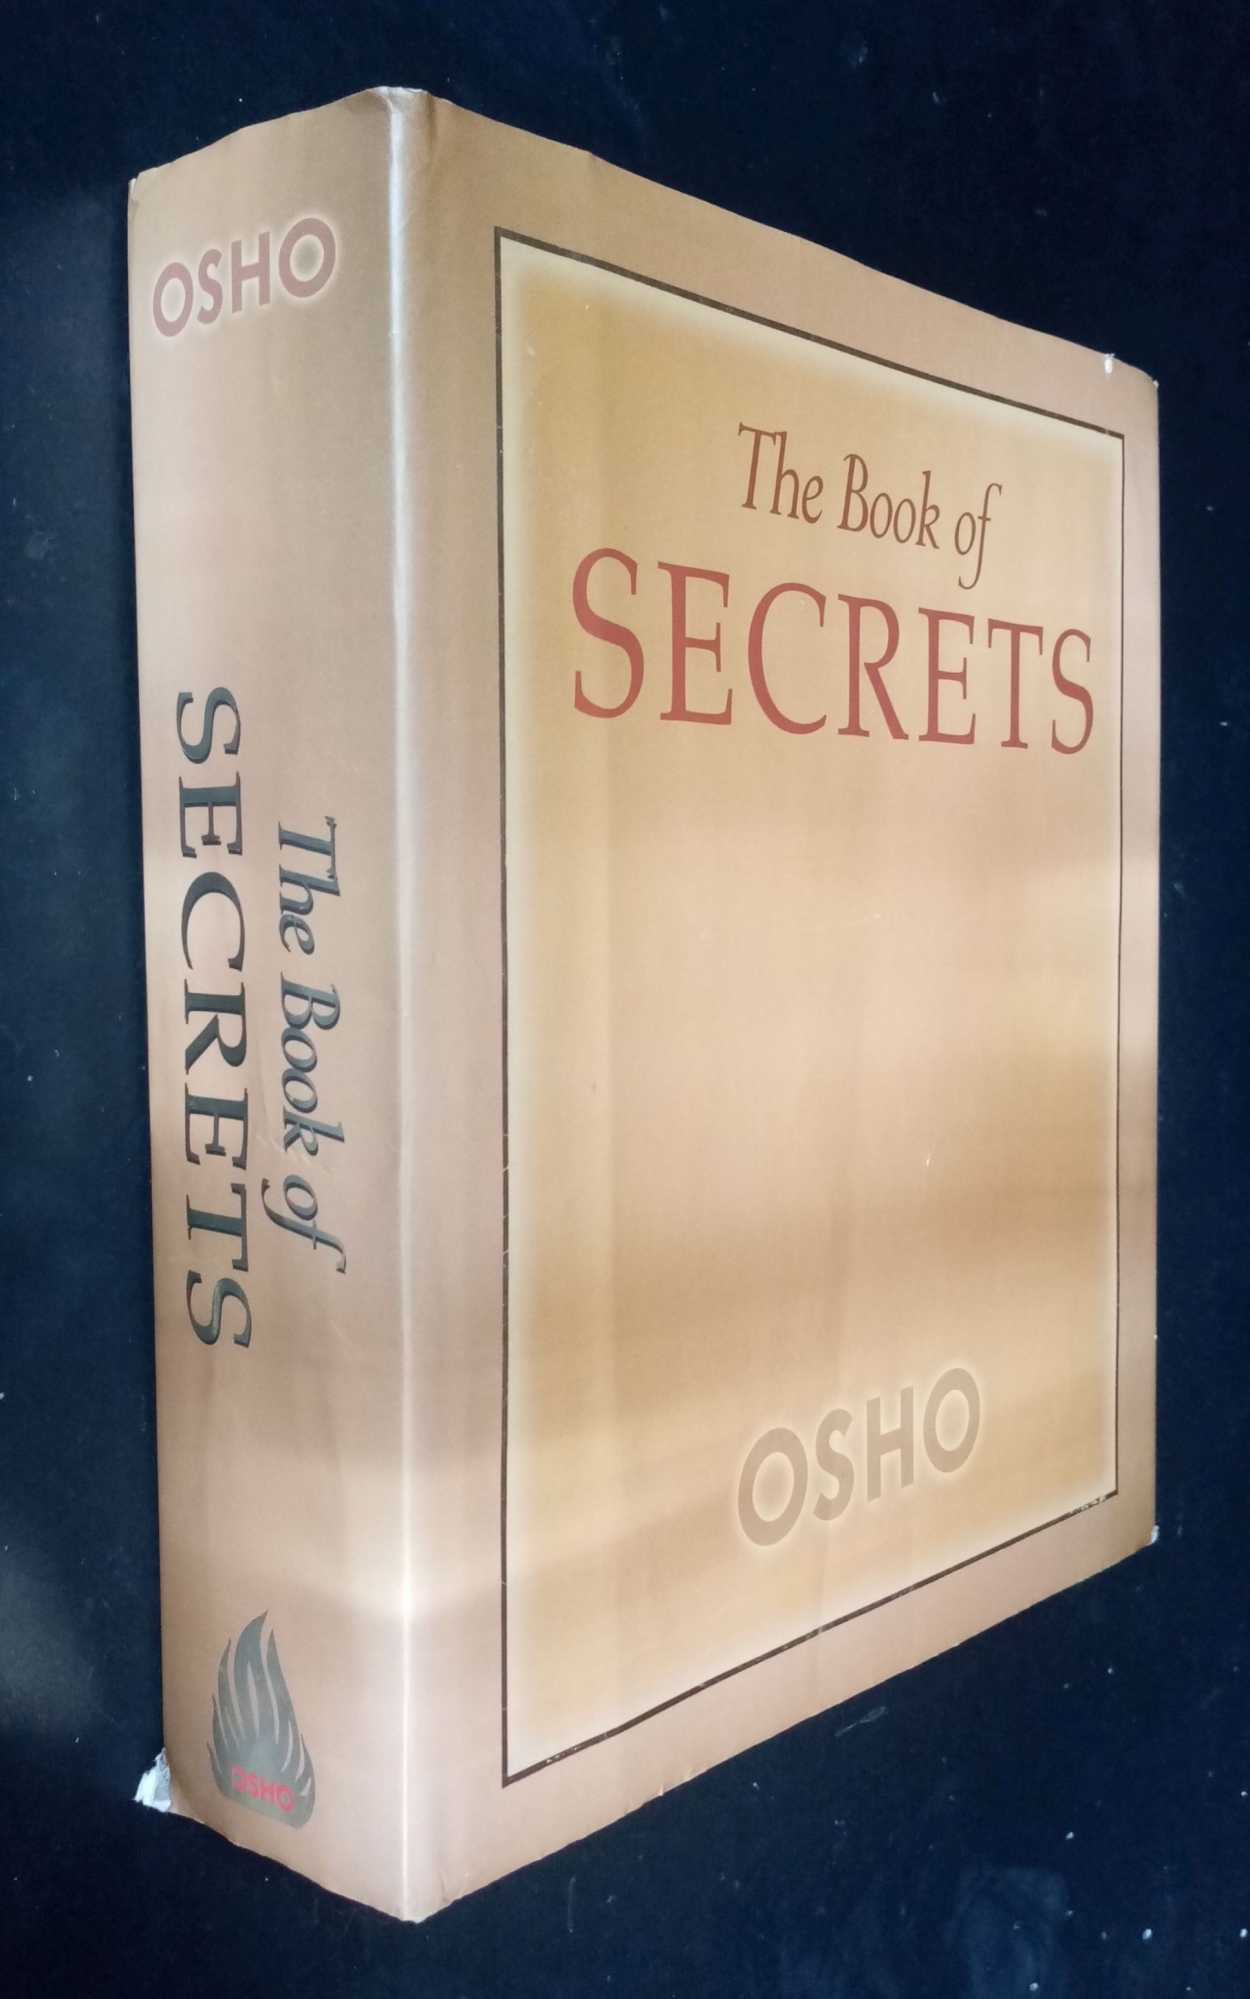 OSHO - The Book of Secrets: 112 Keys To The Mystery Within